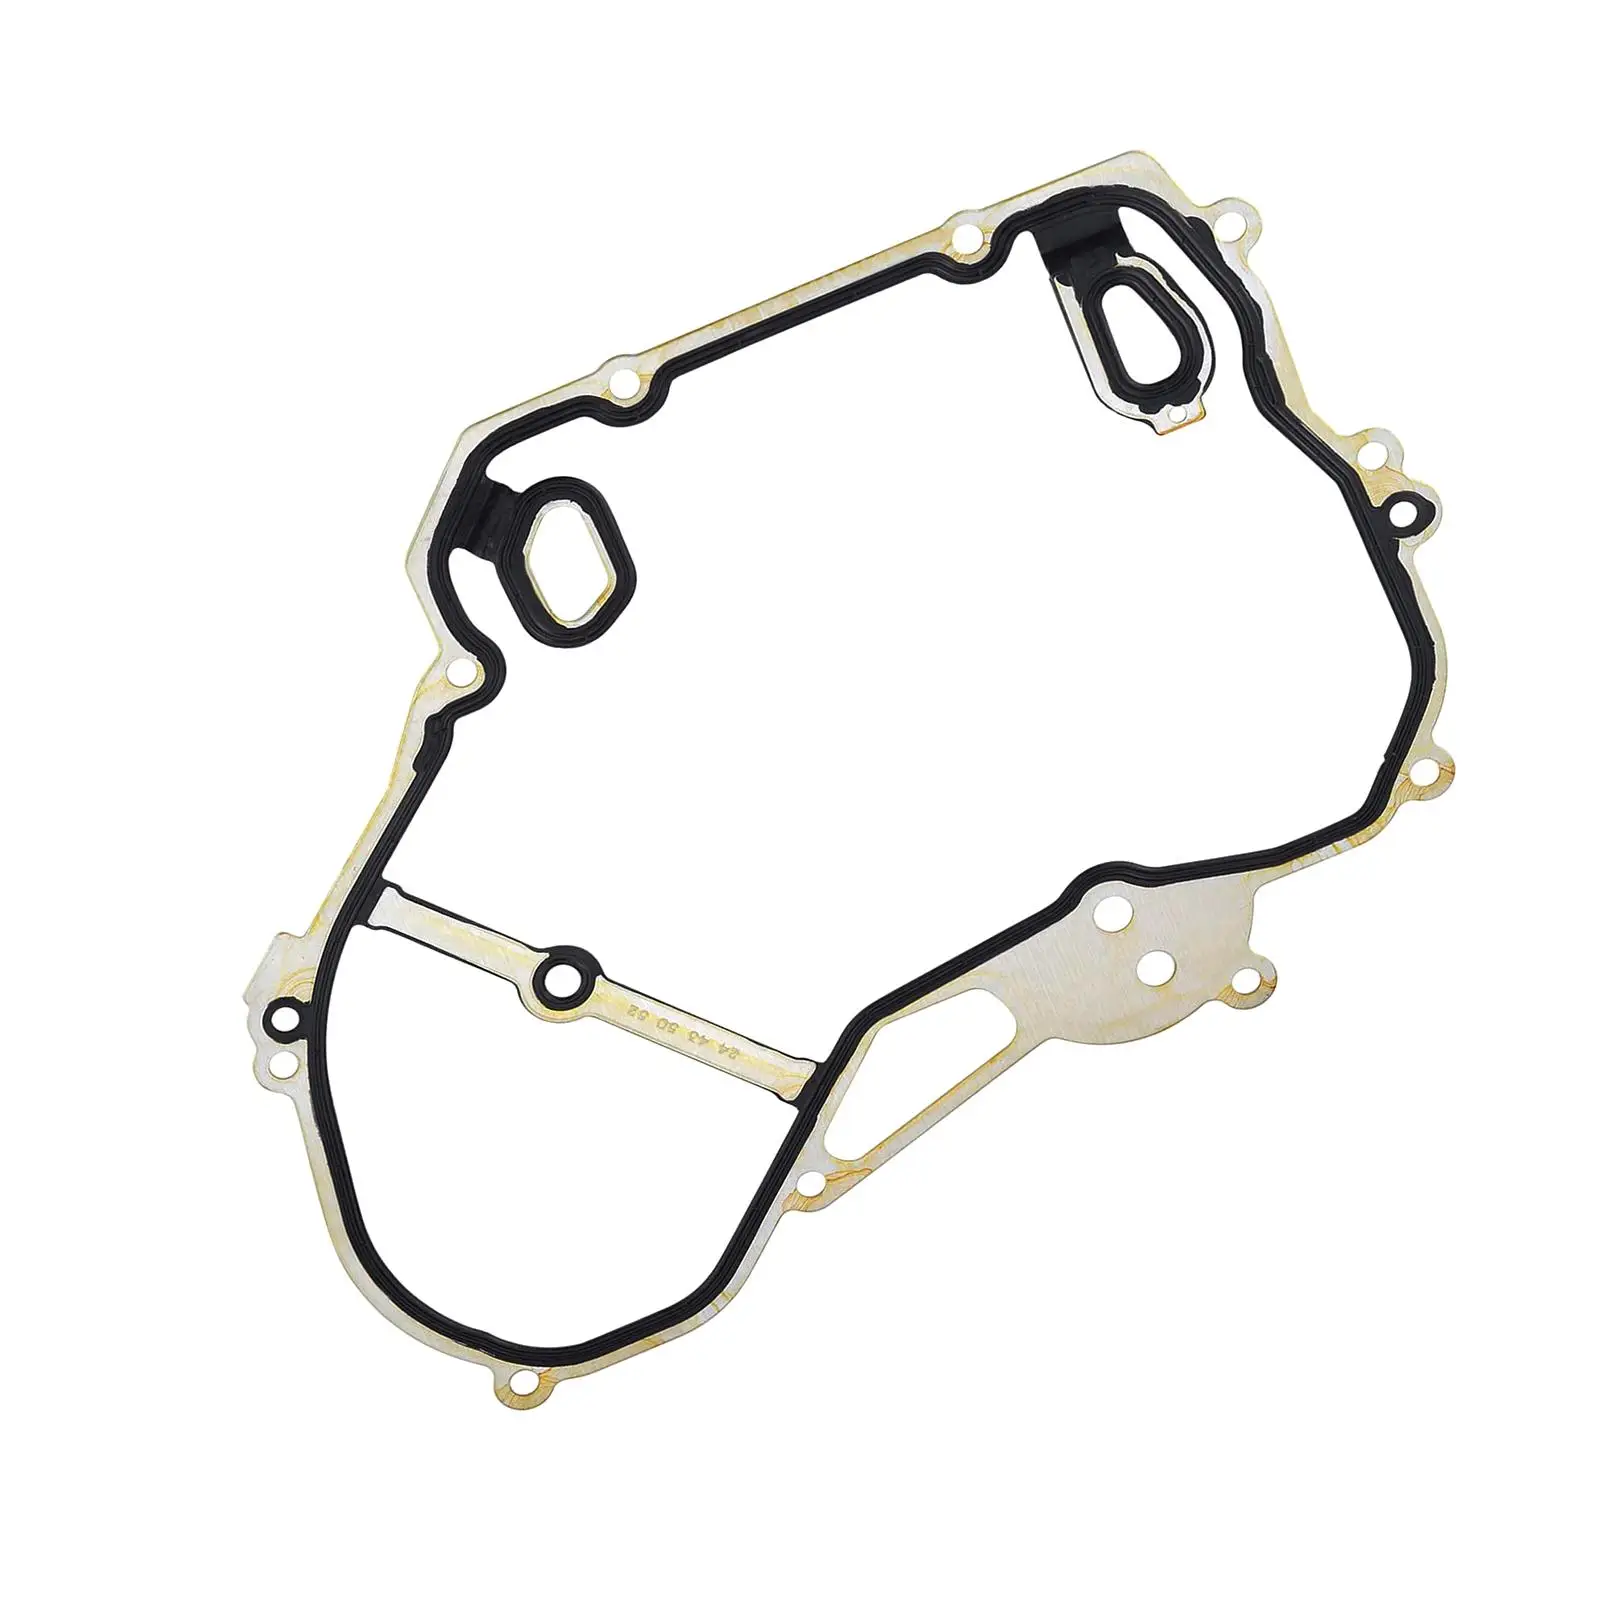 Automobile Front Timing Cover Gasket 24435052 for Buick Professional